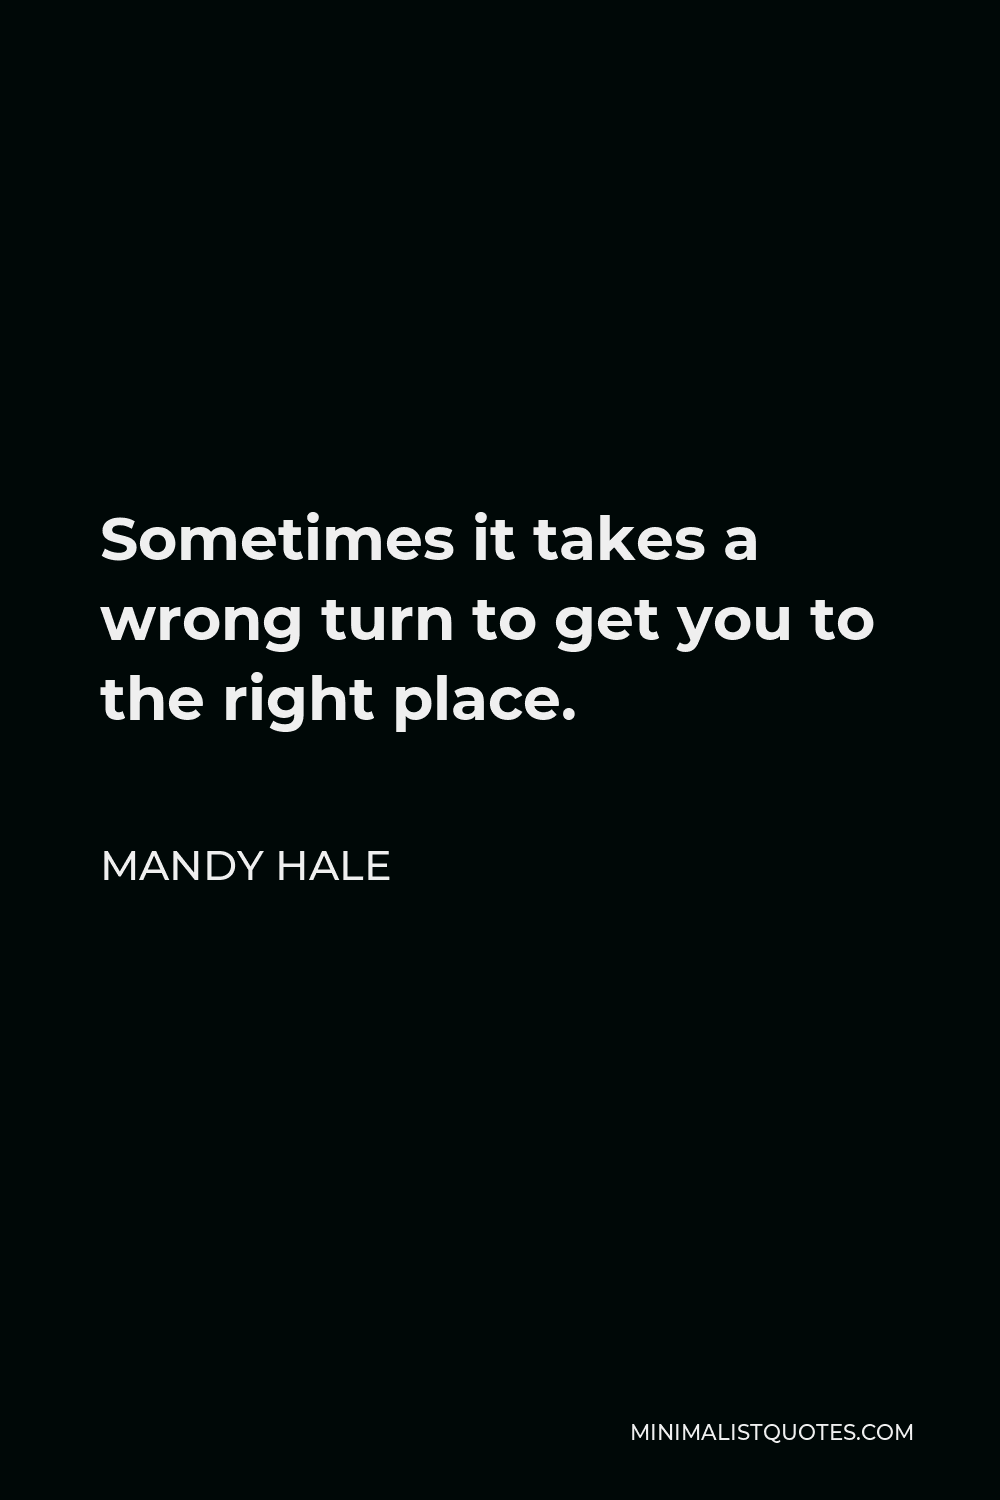 Mandy Hale Quote - Sometimes it takes a wrong turn to get you to the right place.